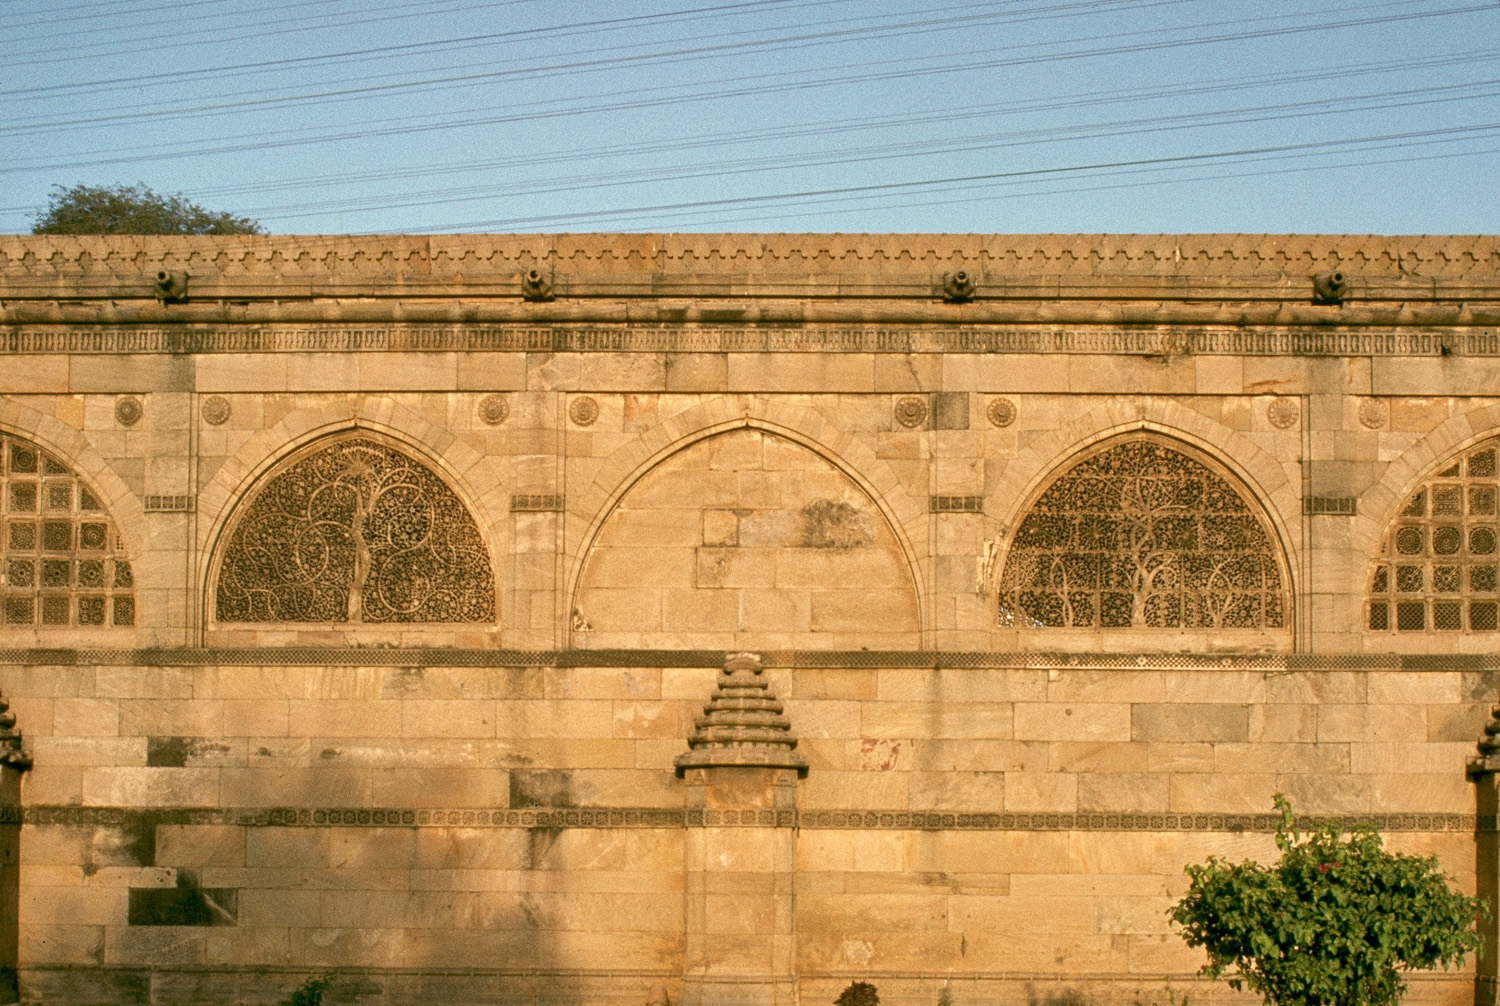 Exterior view, detail of western elevation, showing carved windows